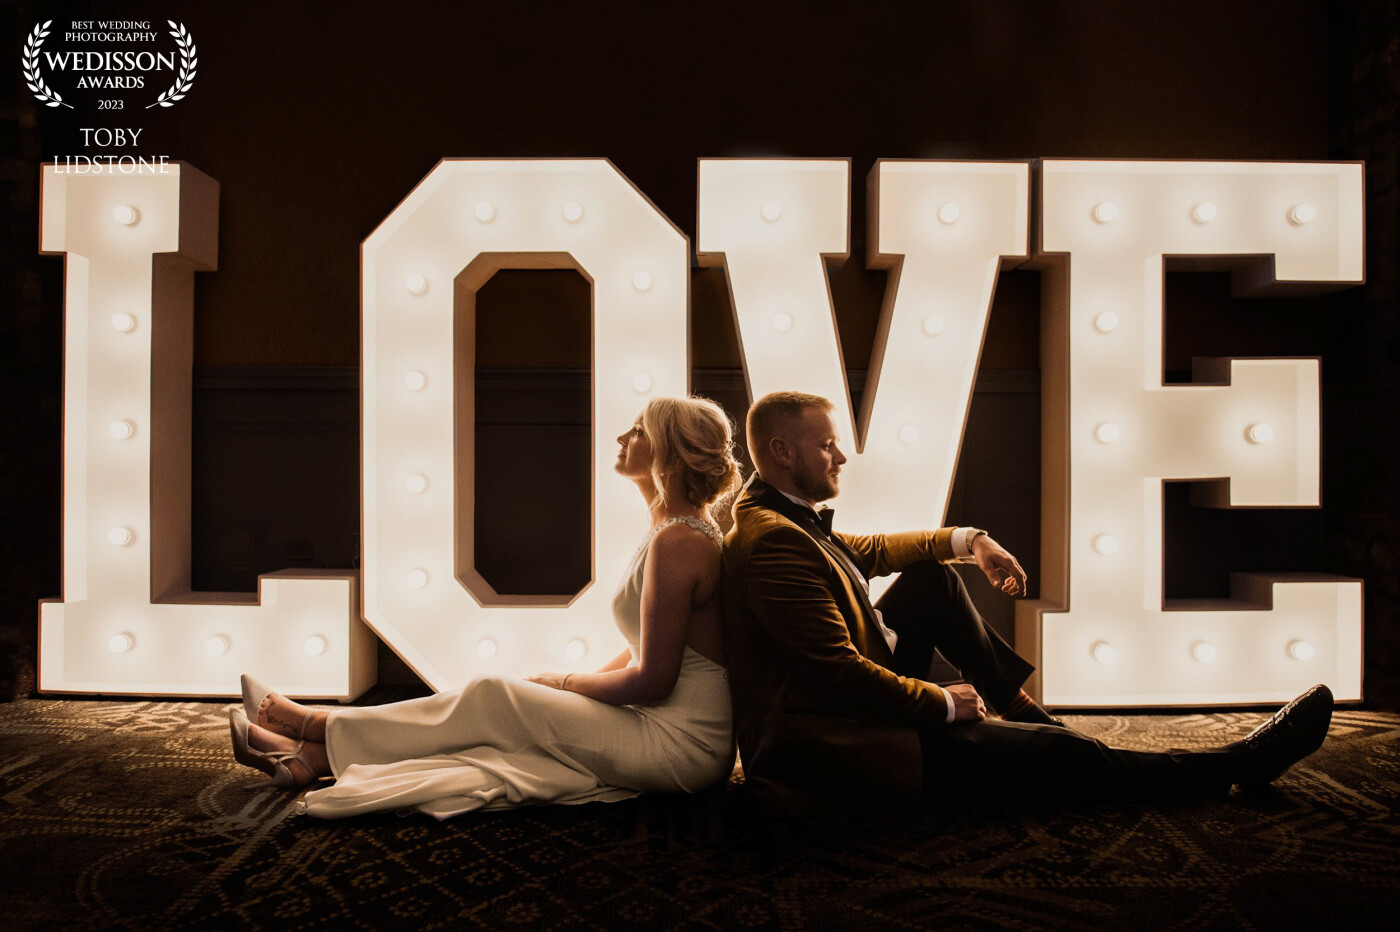 I always see these "Love" letters at weddings, so I wanted to create a cool photo using them.